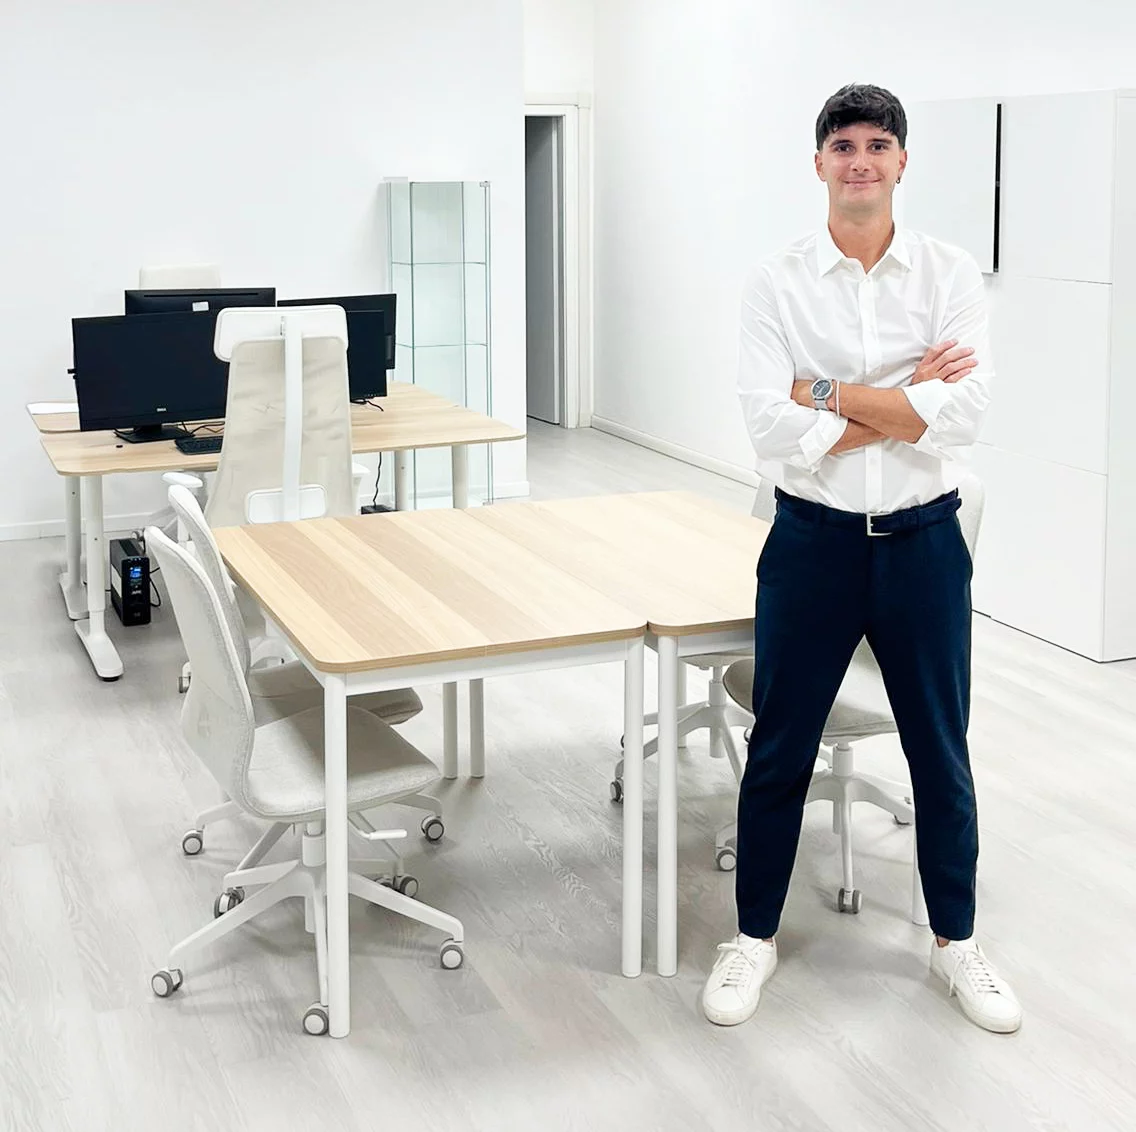 ee-jpg LASIT opens a new office in Bologna